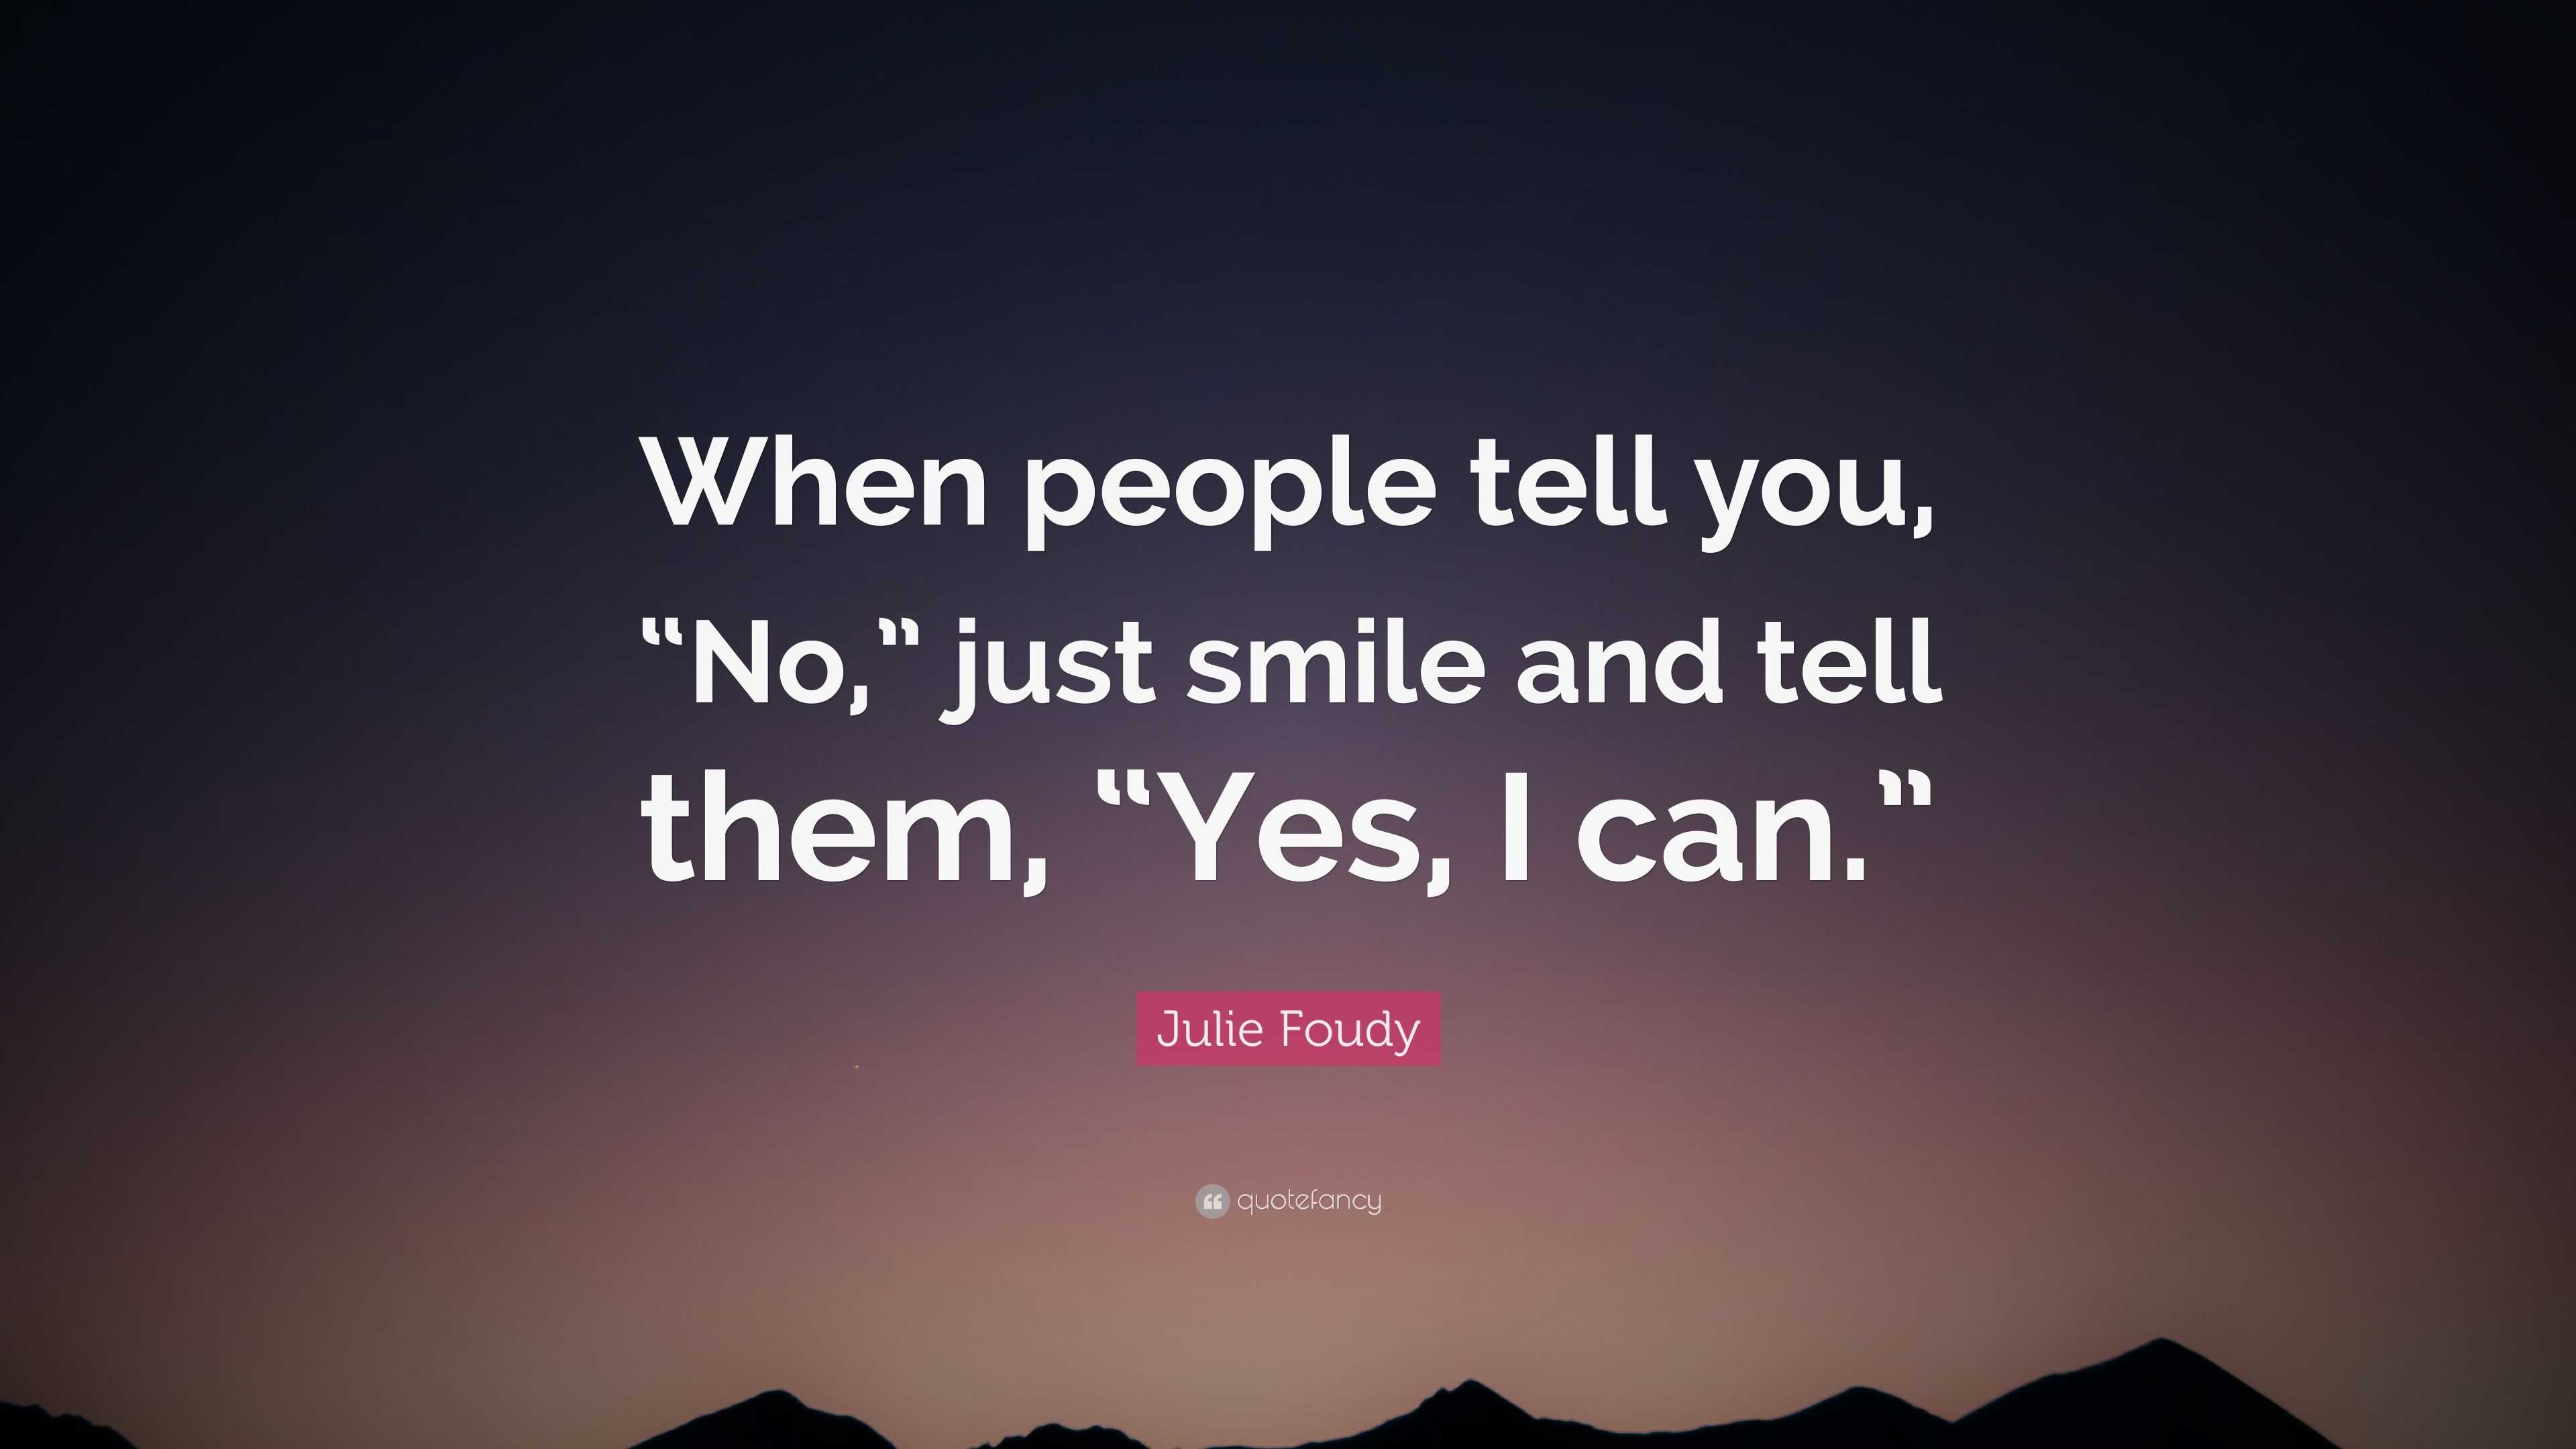 Julie Foudy Quote: “When people tell you, “No,” just smile and tell ...